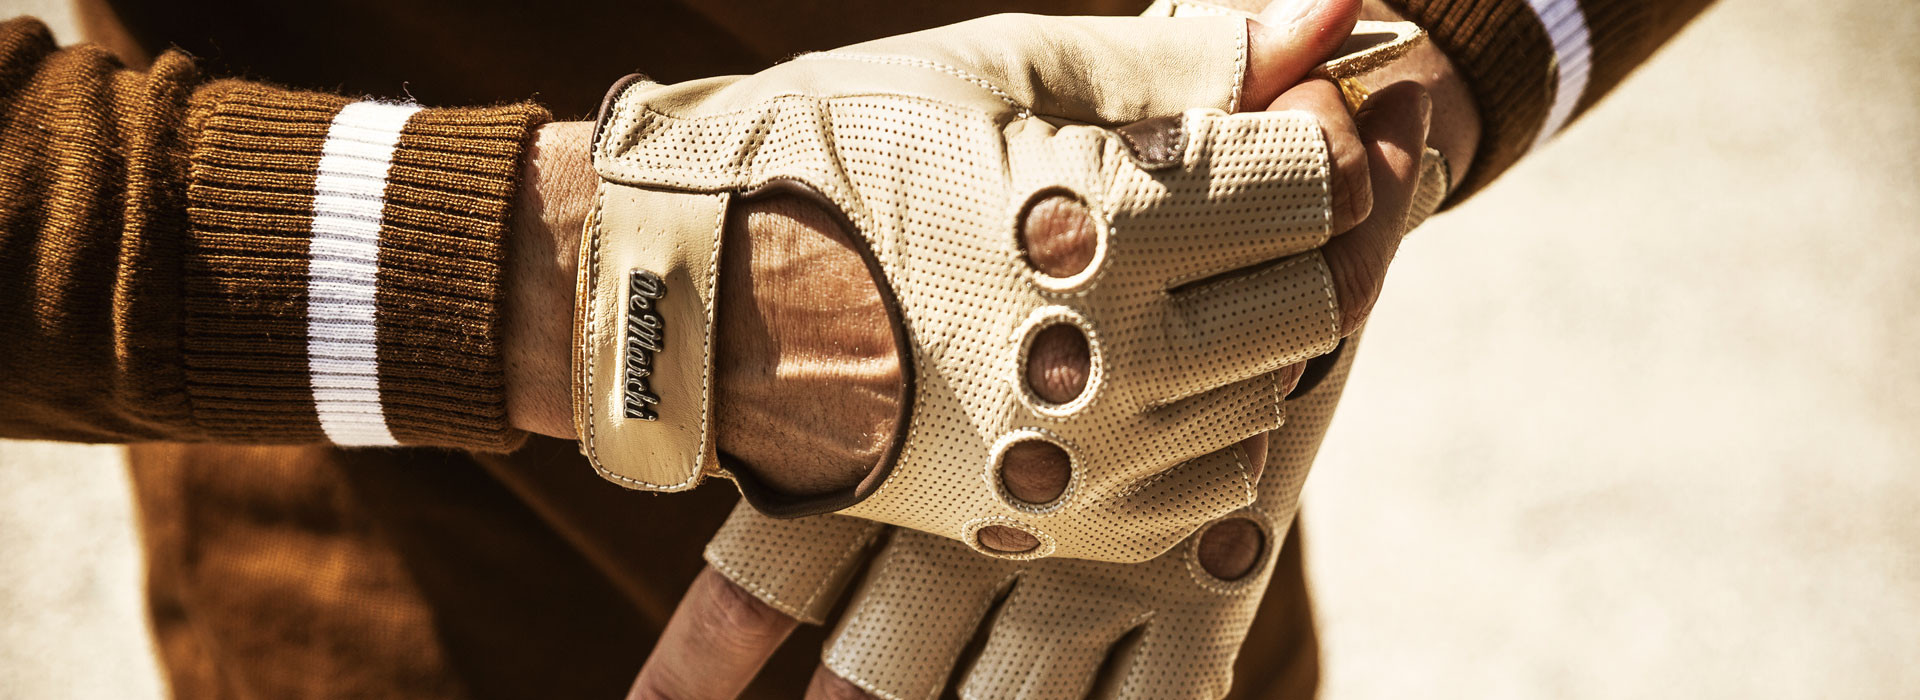 Demarchi - Retro cycling gloves